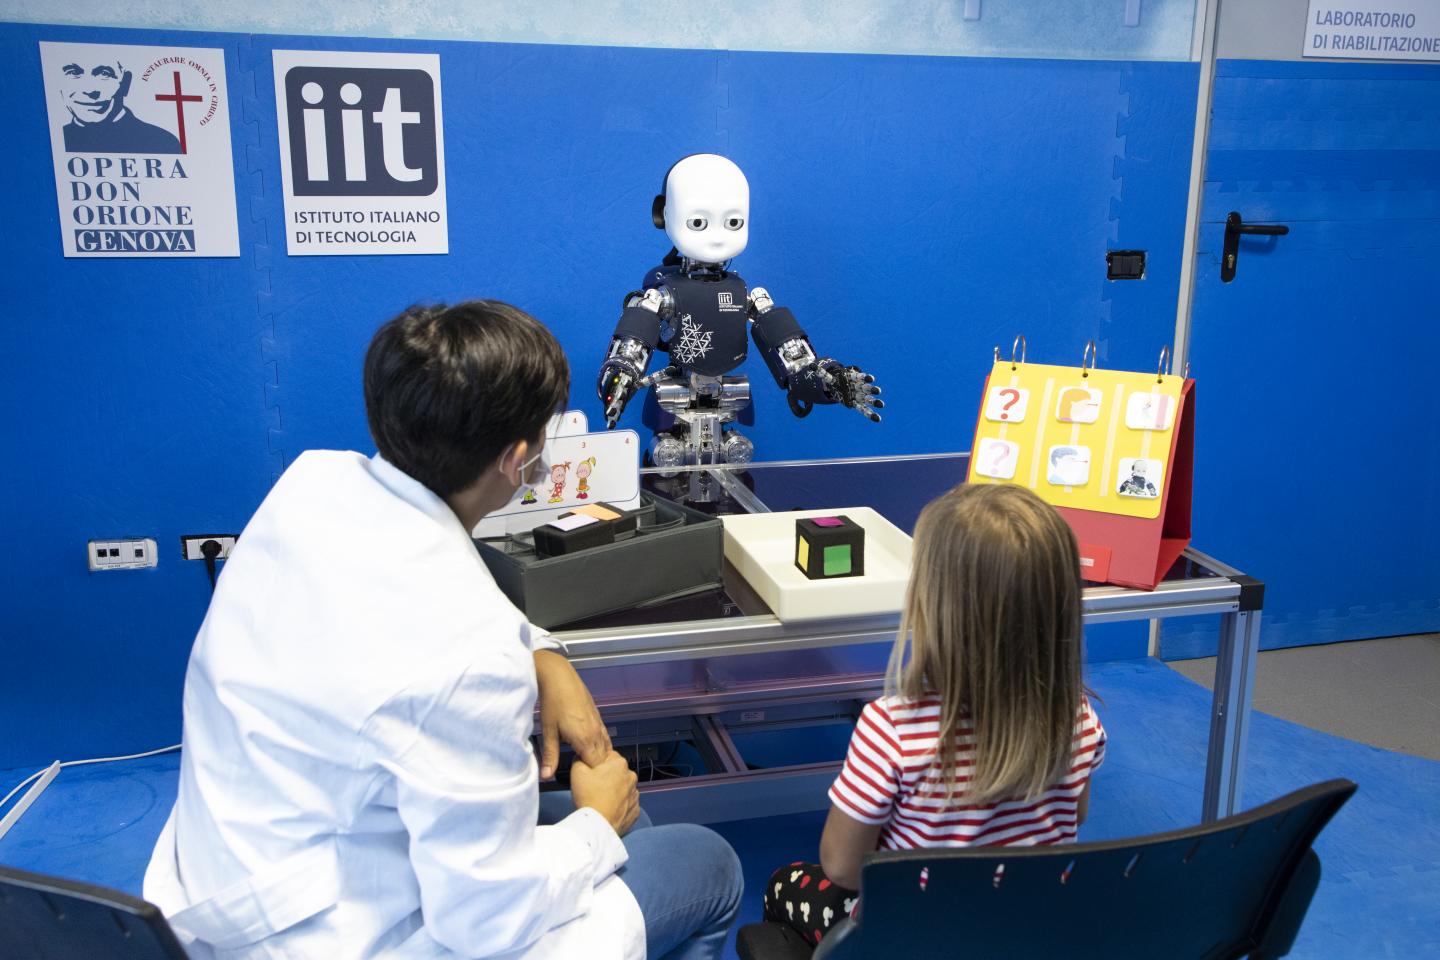 IIT's humanoid robot iCub used in the treatment of autism